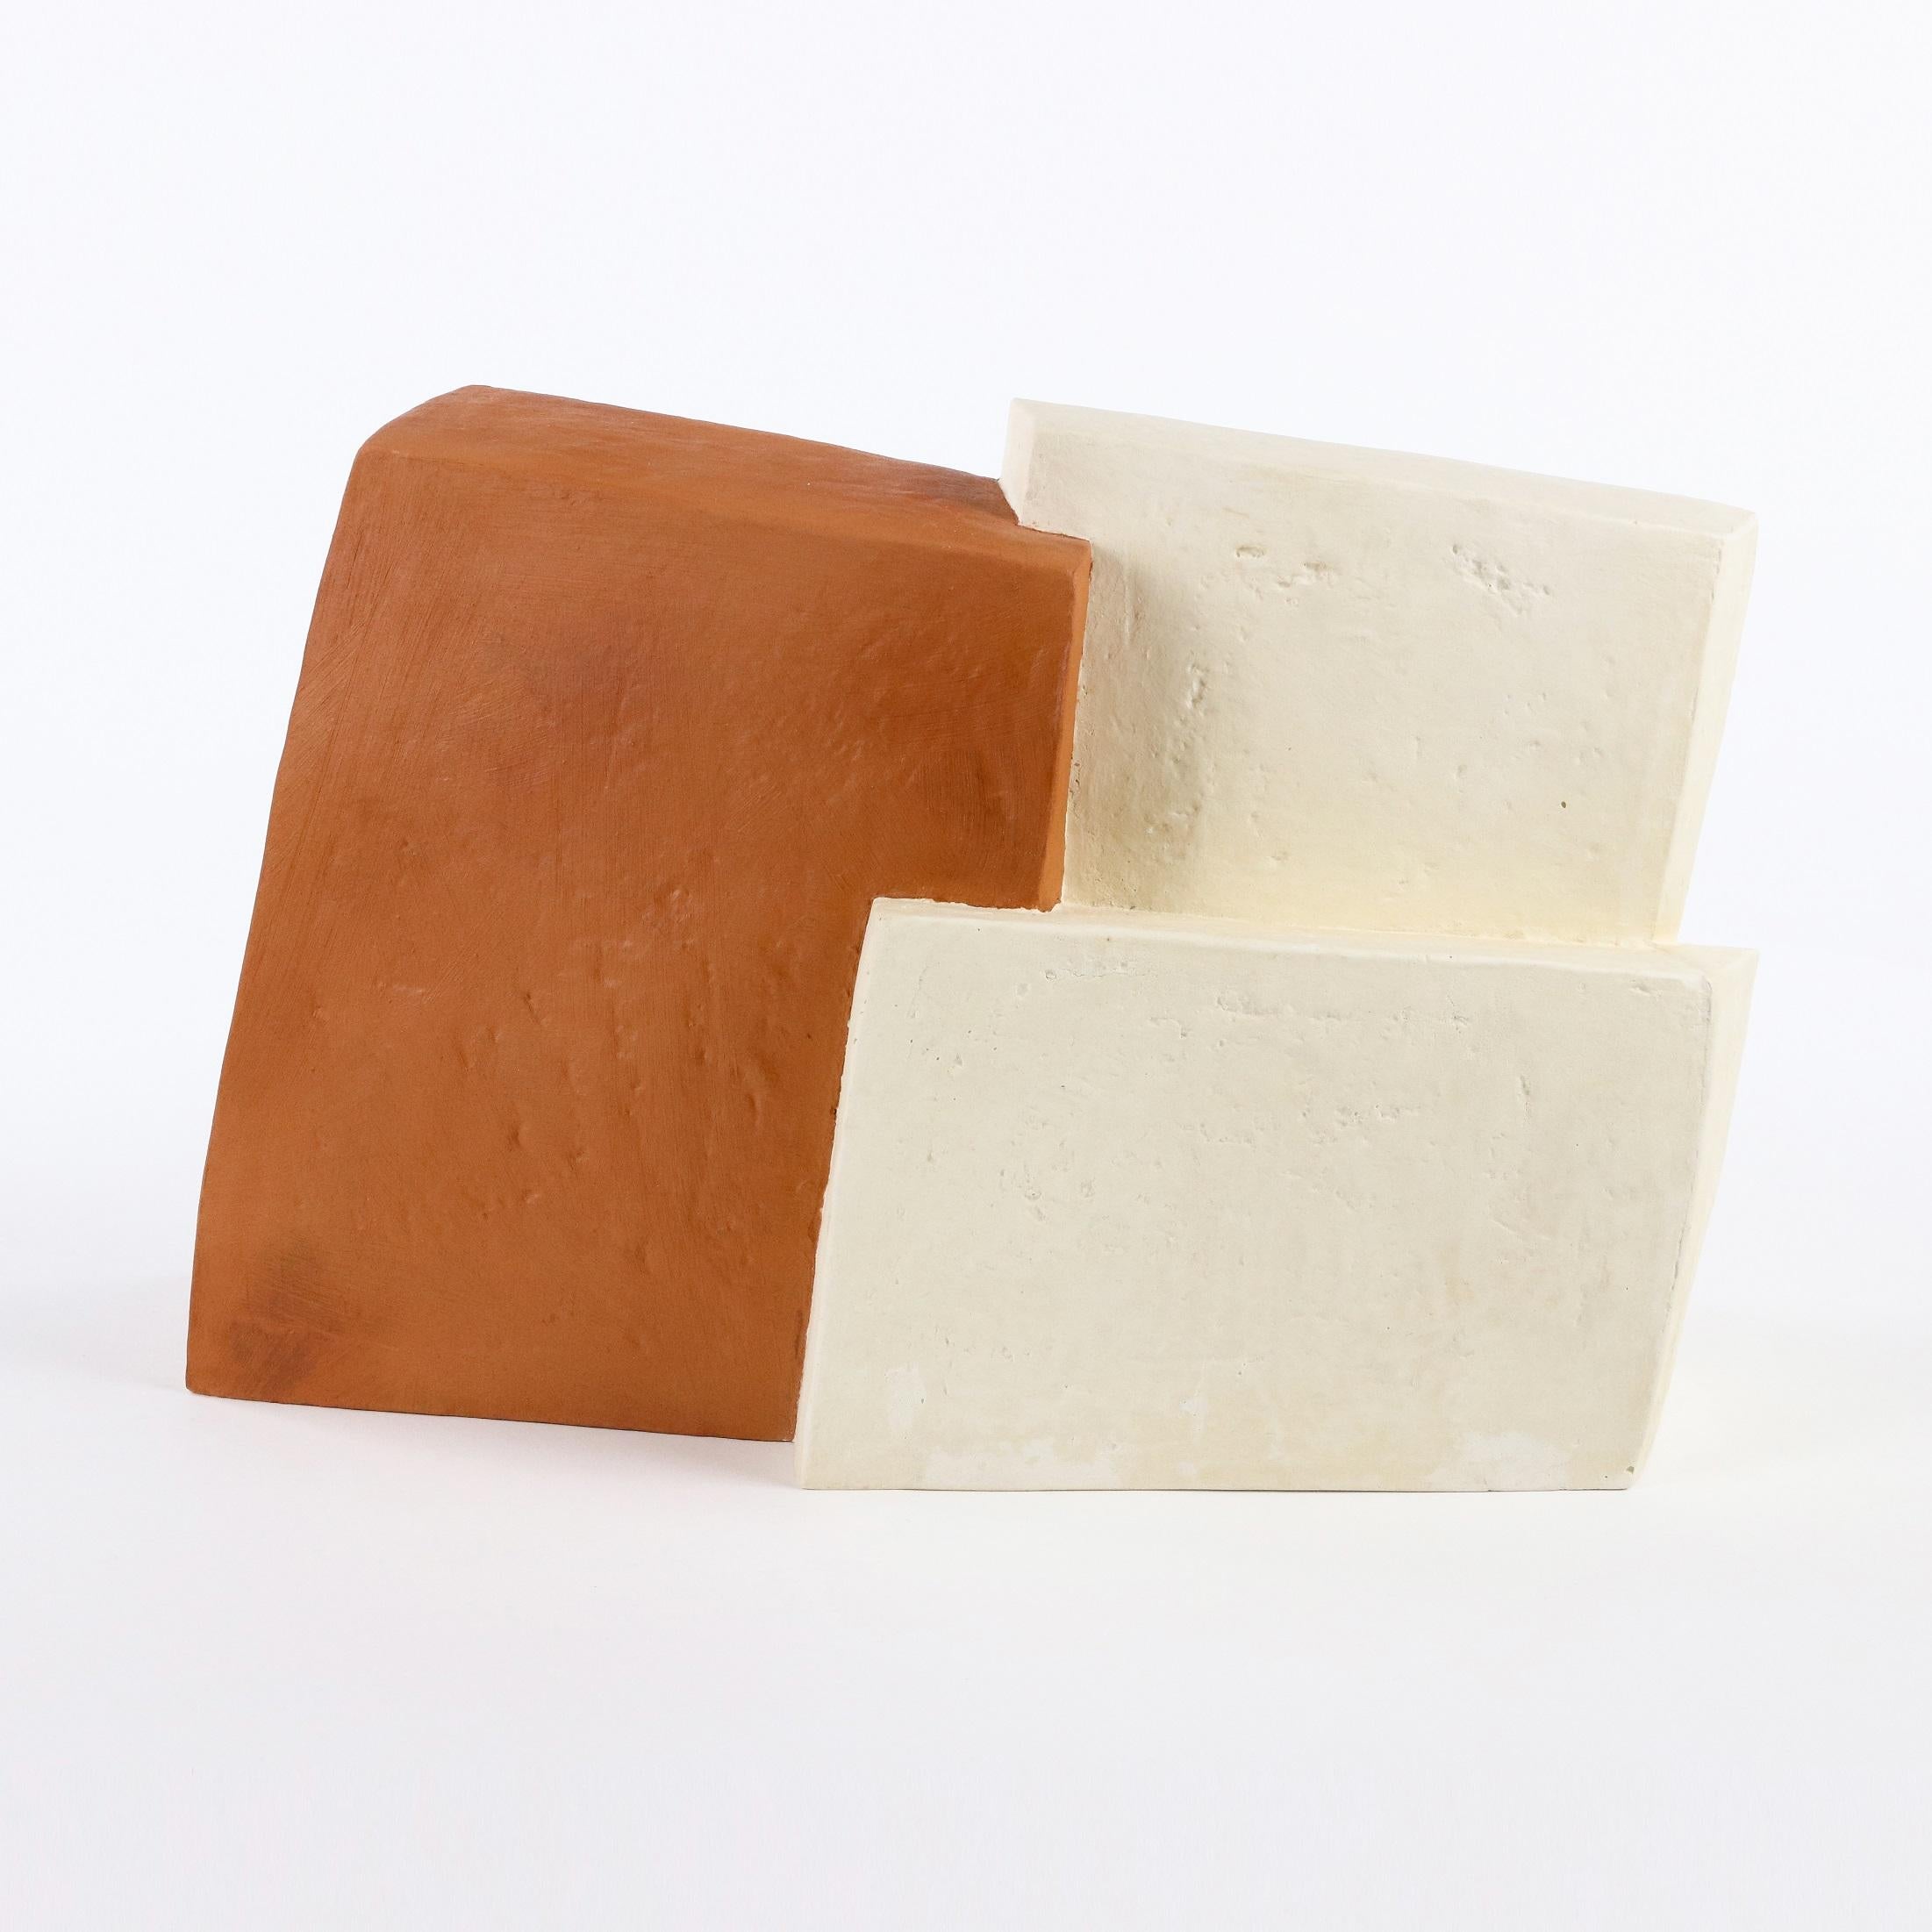 Forms by Delphine Brabant - Abstract geometric sculpture, blocks, white, orange For Sale 1